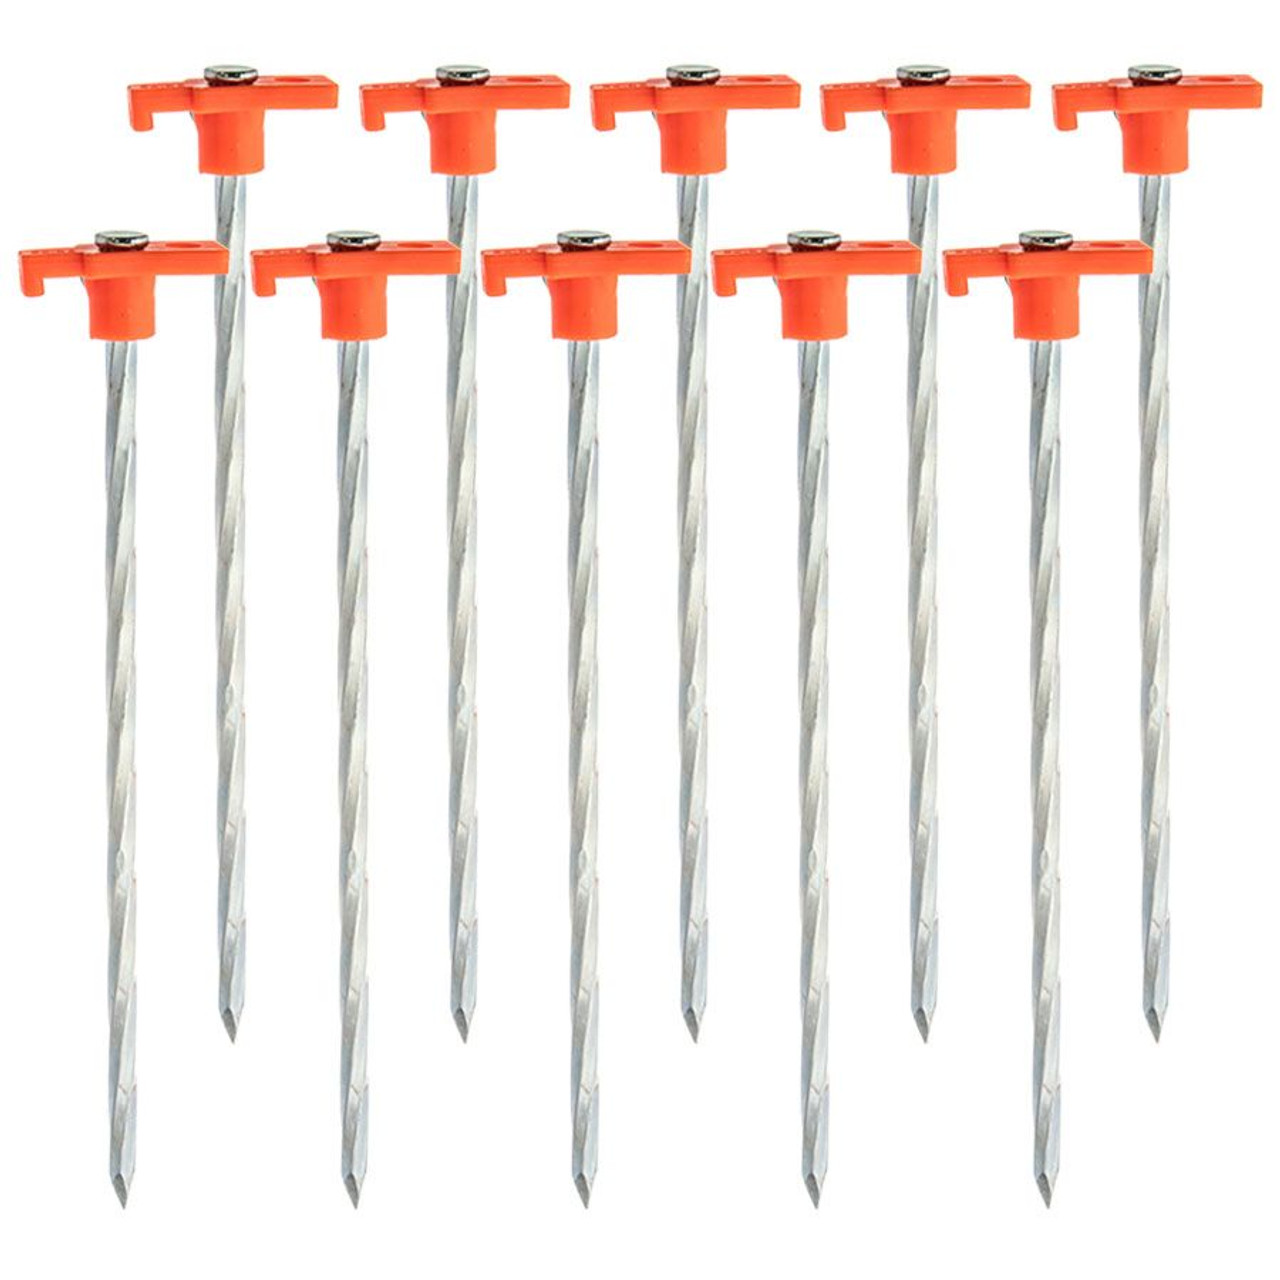 10 Pack - 10 Metal Twisted Tent Pegs With Orange Plastic Stopper - 7MM  Thickness